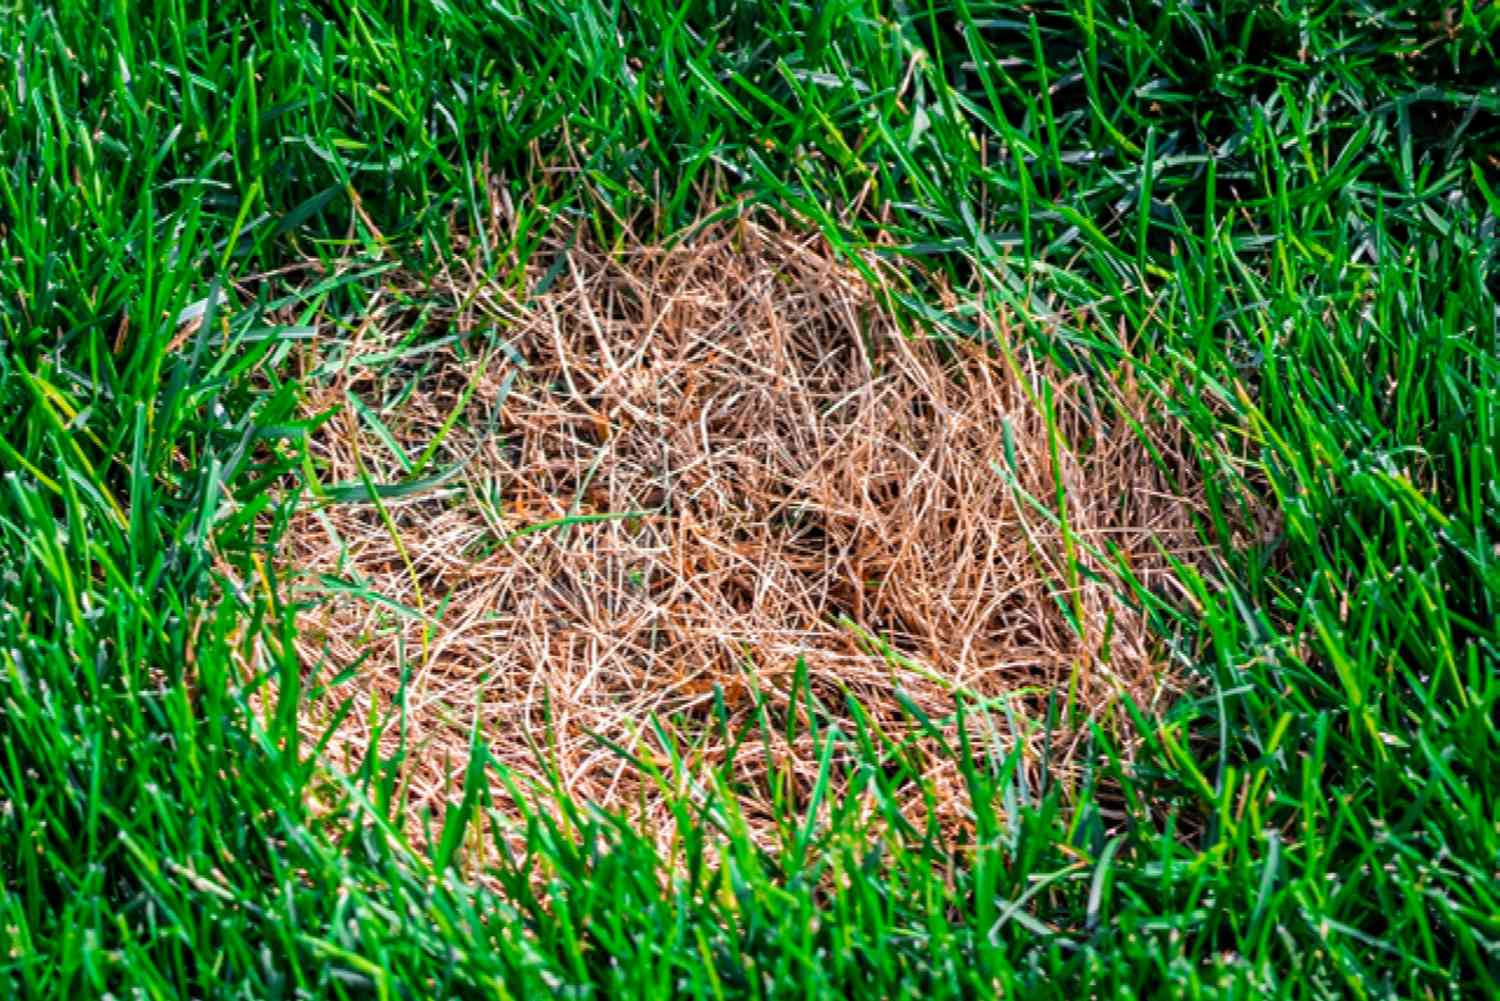 How to Treat Brown Patch Fungus in Your Lawn